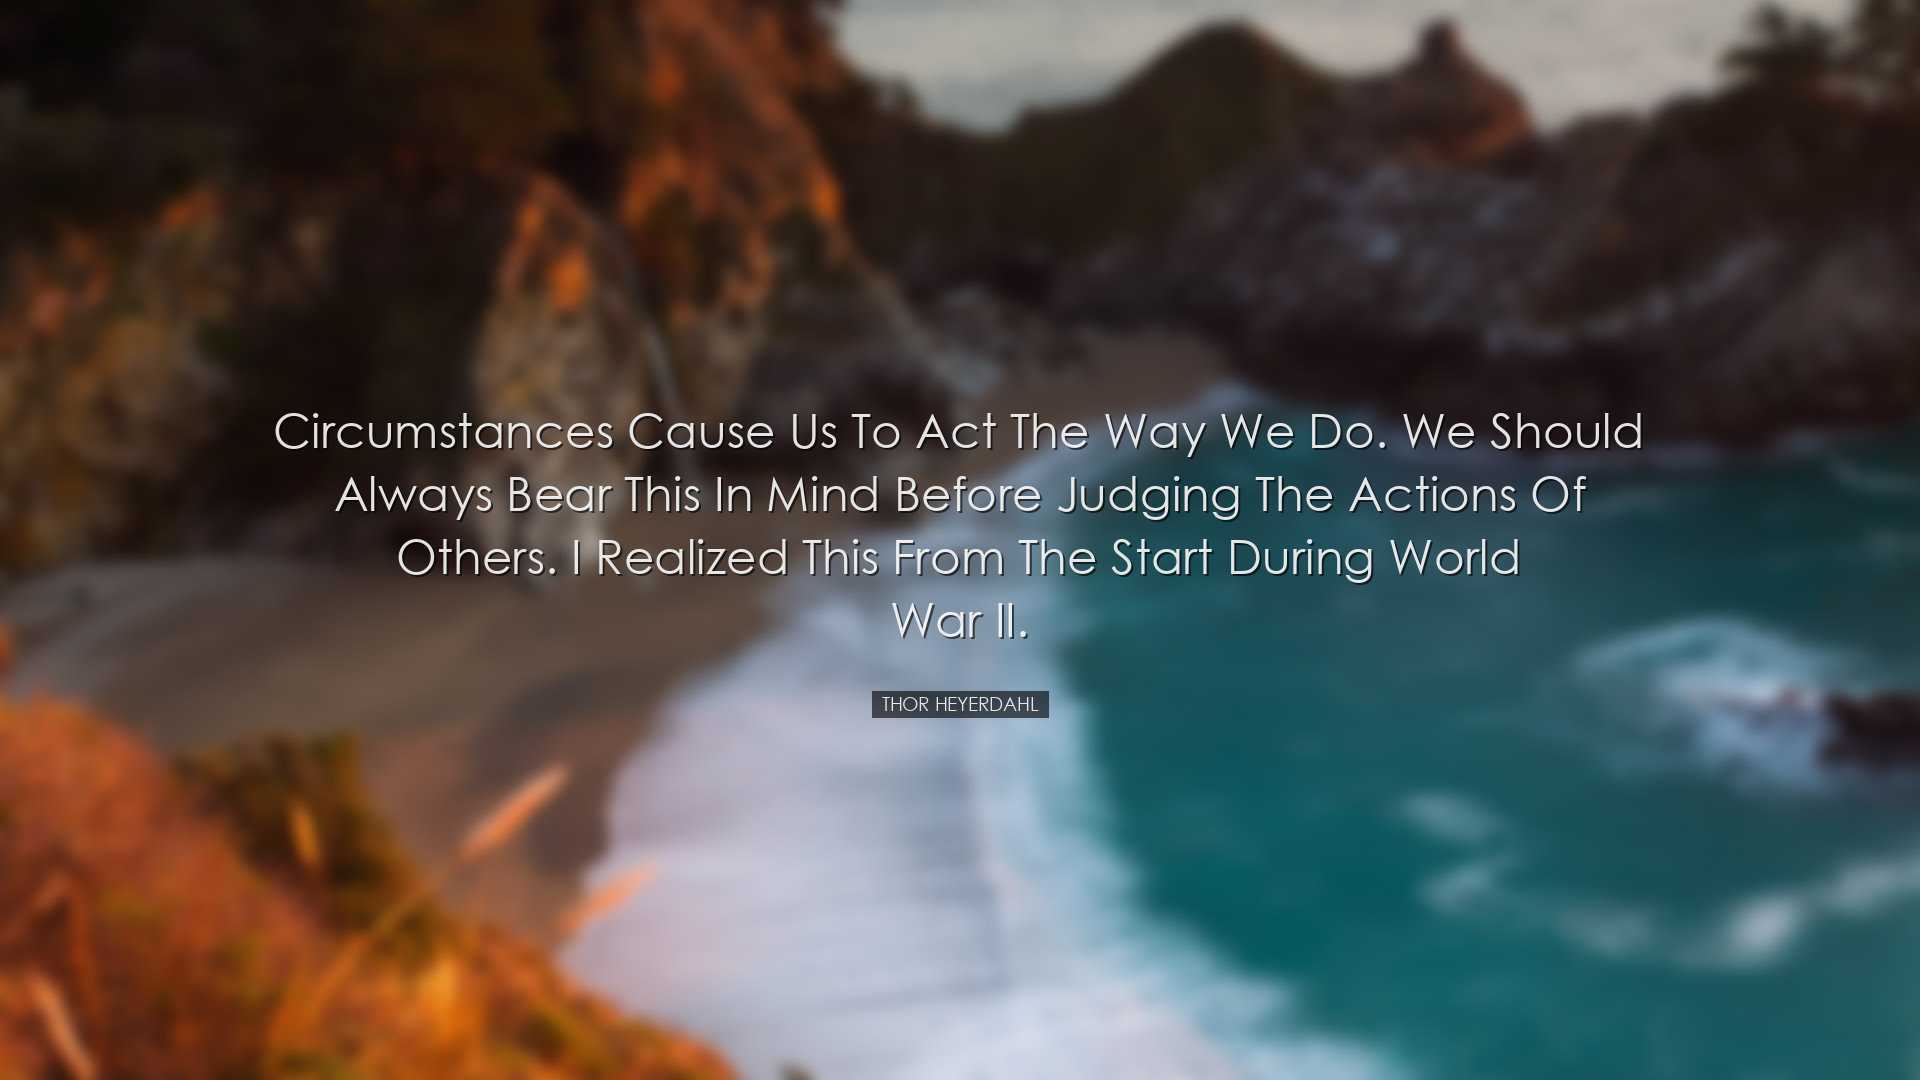 Circumstances cause us to act the way we do. We should always bear